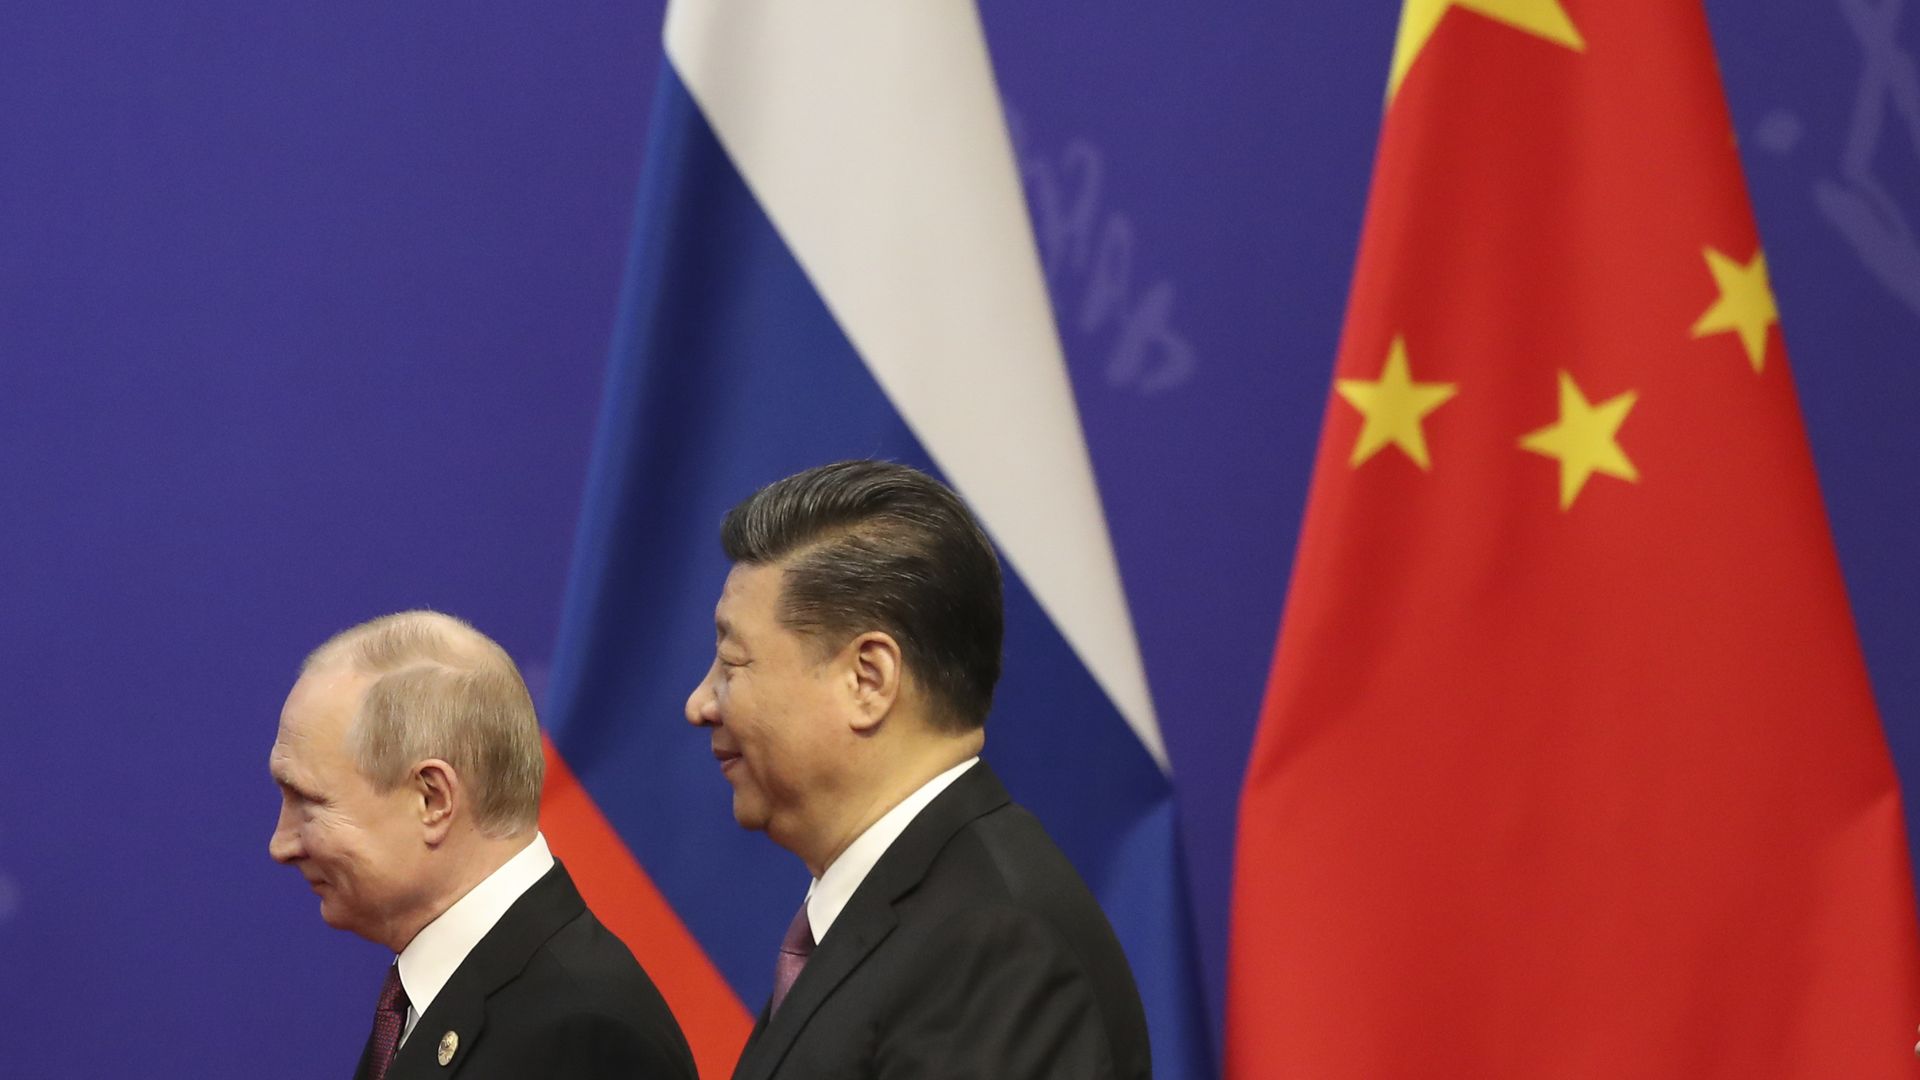 Russian President Vladimir Putin, left, and Chinese President Xi Jinping, right, in front of two flags